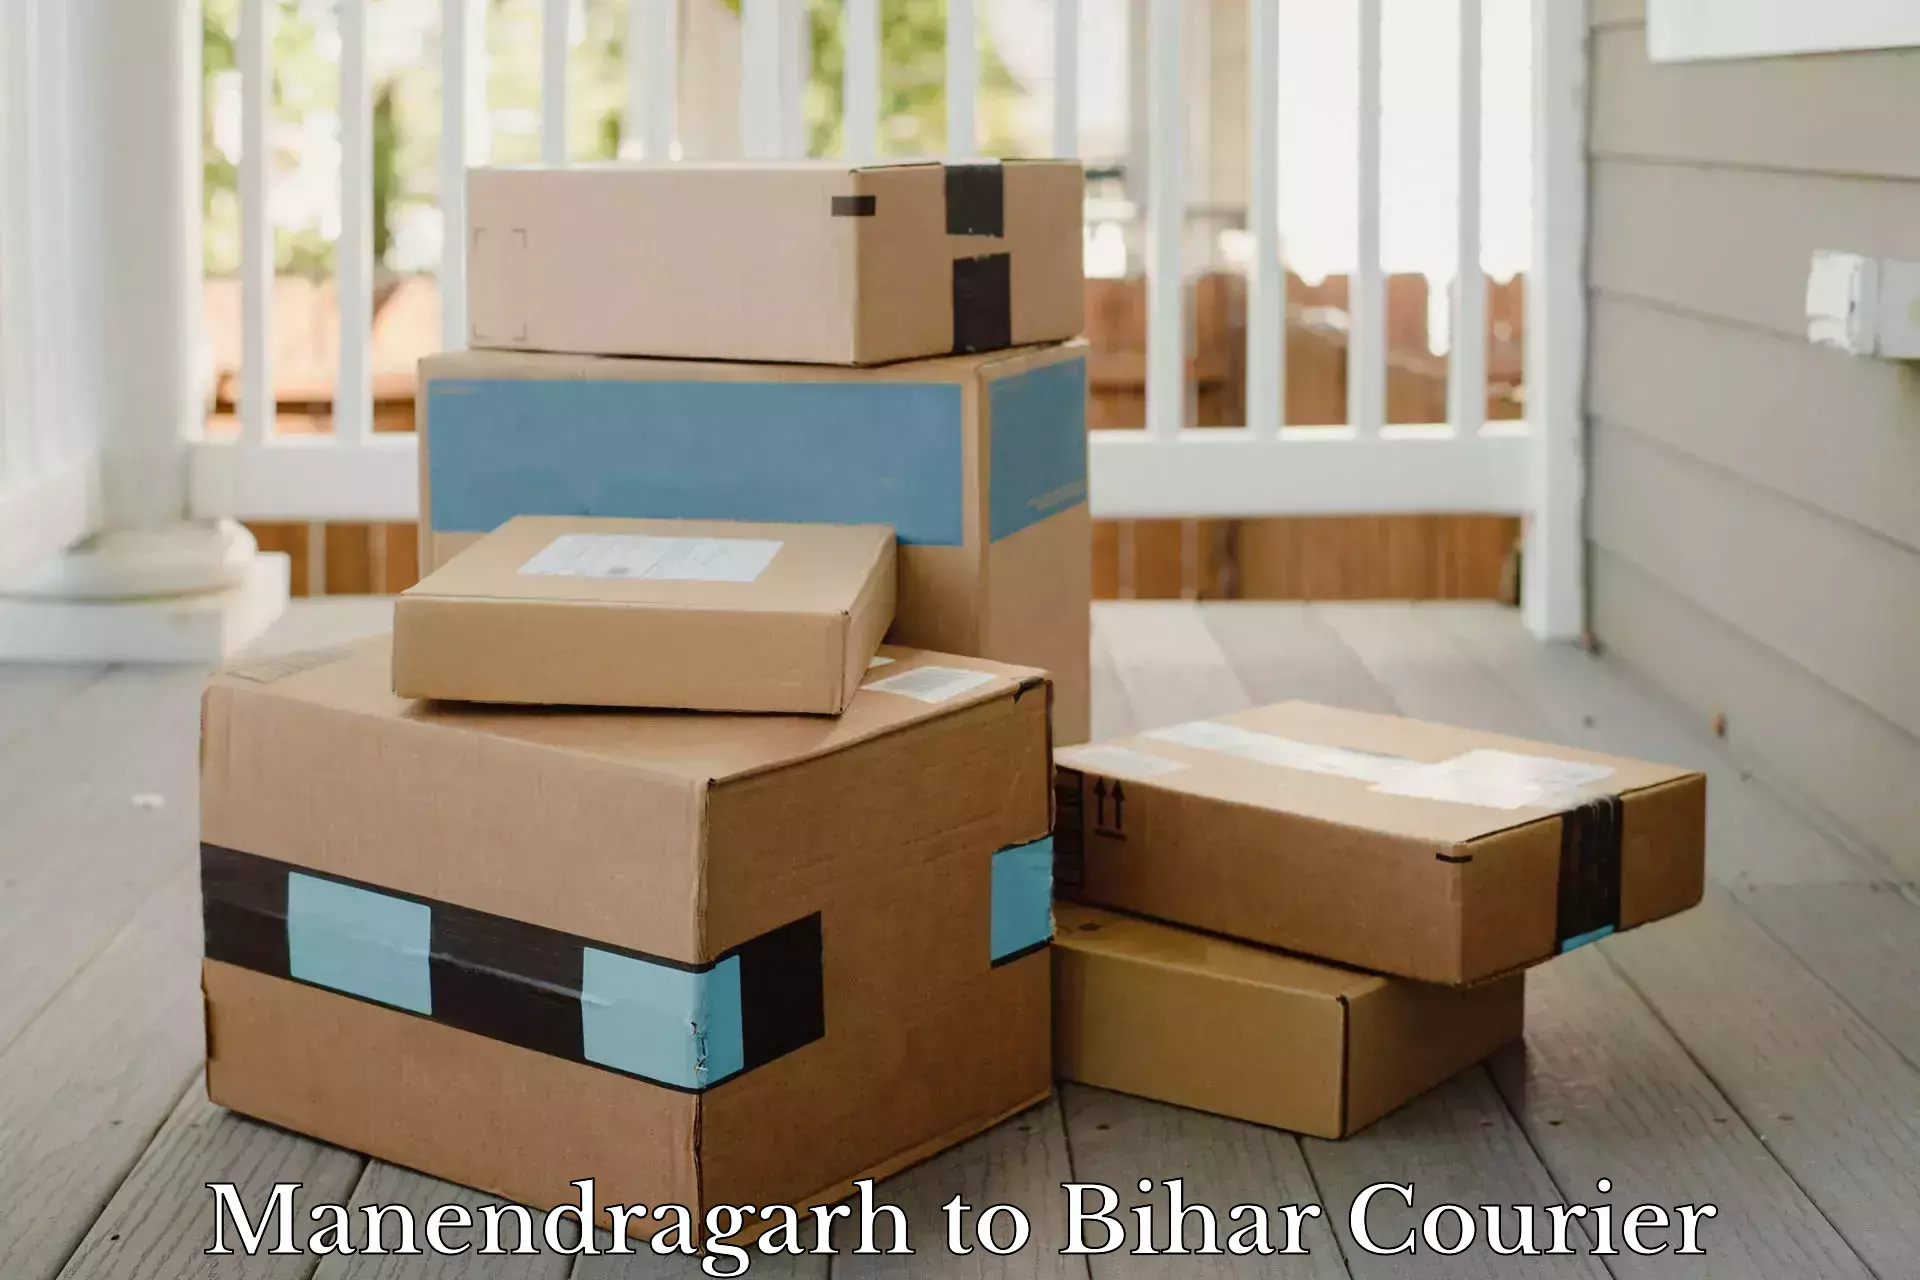 Secure shipping methods Manendragarh to Rajpur